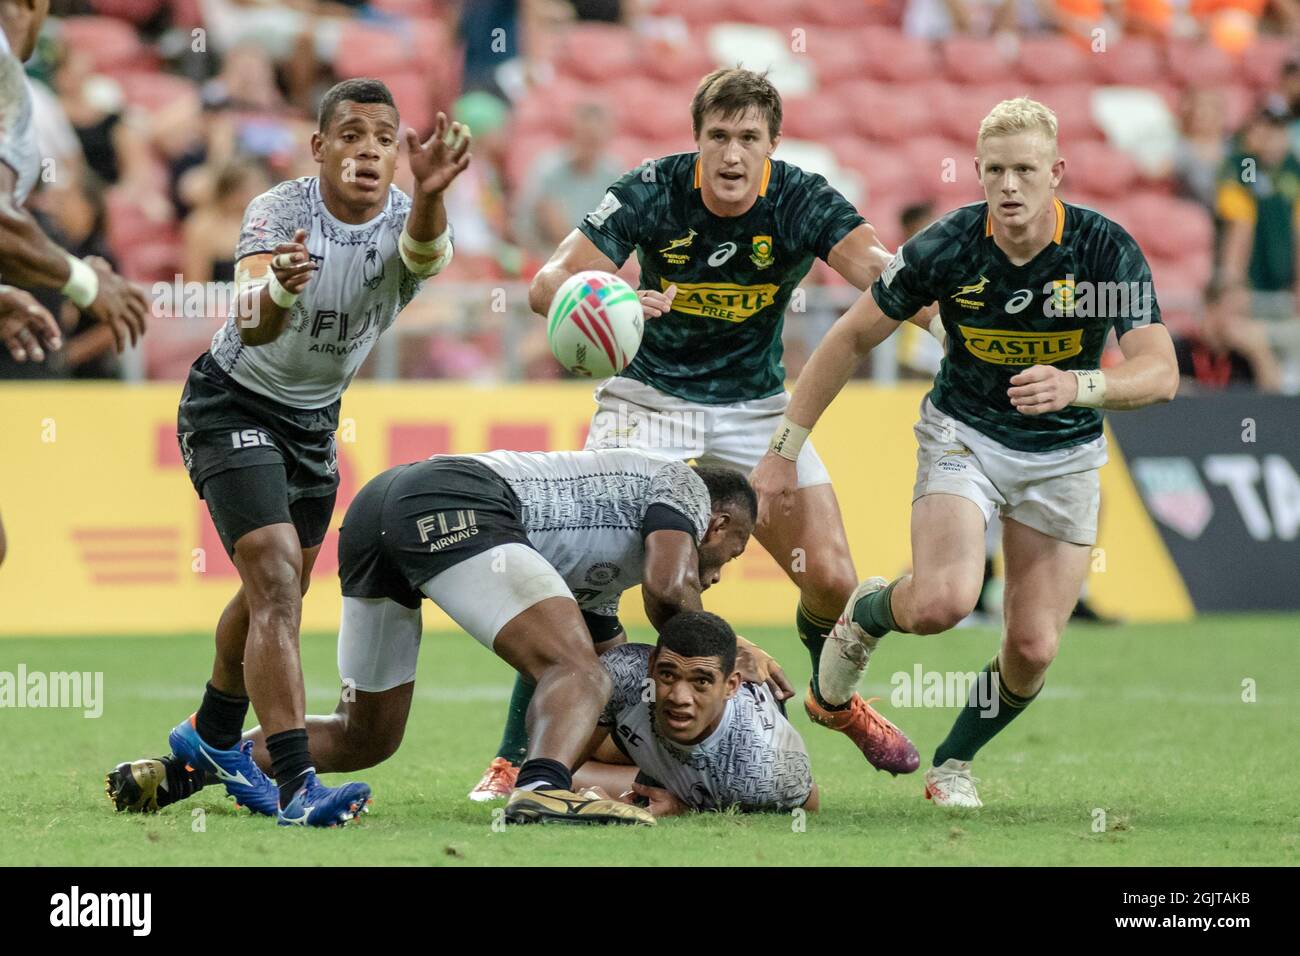 SINGAPORE-APRIL 13:South Africa 7s Team (green) plays against Fiji 7s team (white) during Day 1 of HSBC World Rugby Singapore Sevens on April 13, 2019 at National Stadium in Singapore Stock Photo